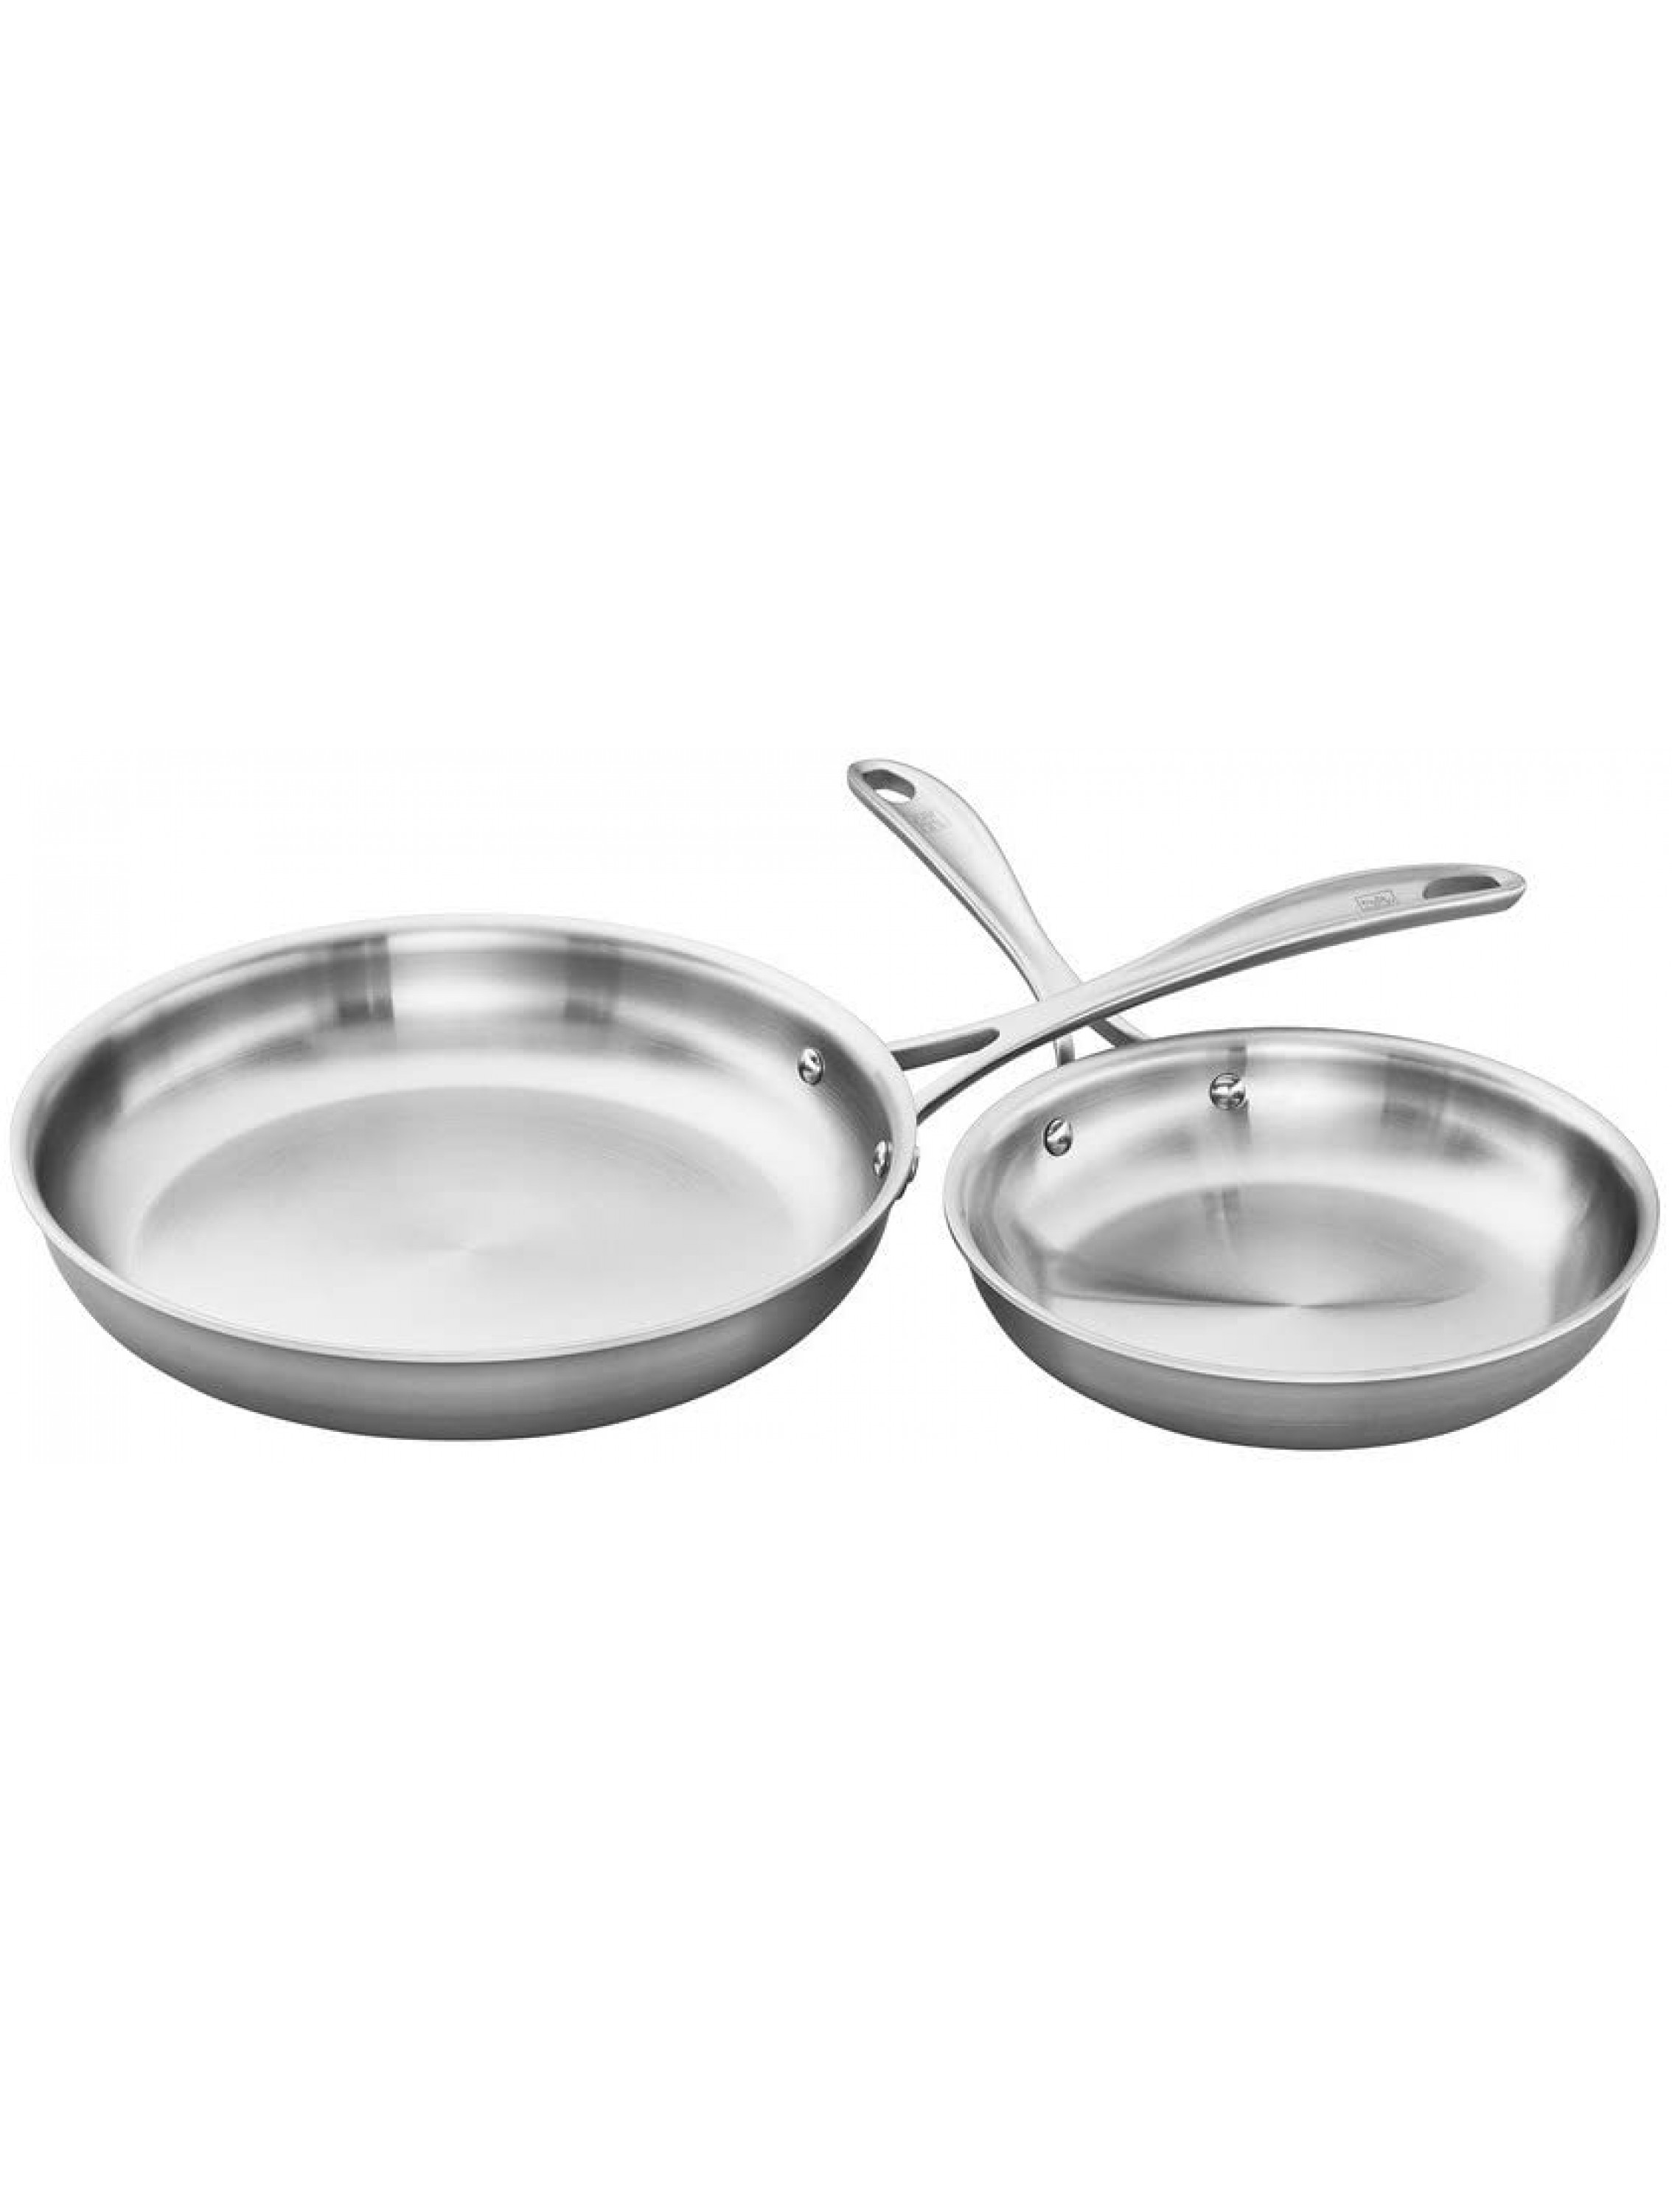 ZWILLING Spirit Stainless Fry Pan Set 2-pc Stainless Steel - BA8A58789